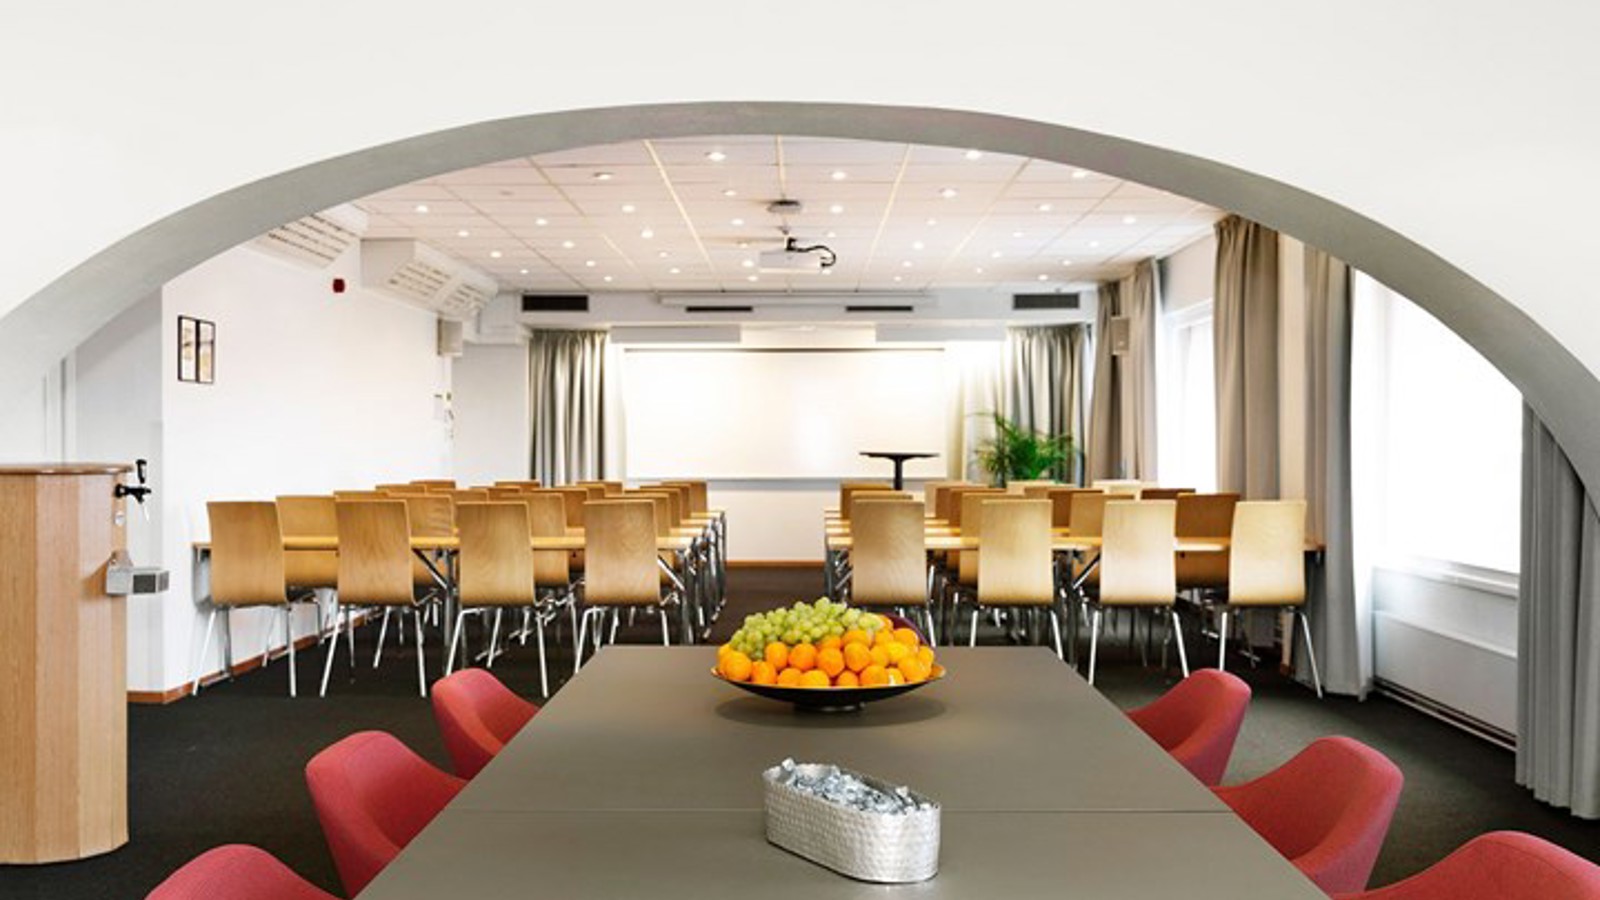 Conference room with lined up chairs, white walls, dark floor and large window